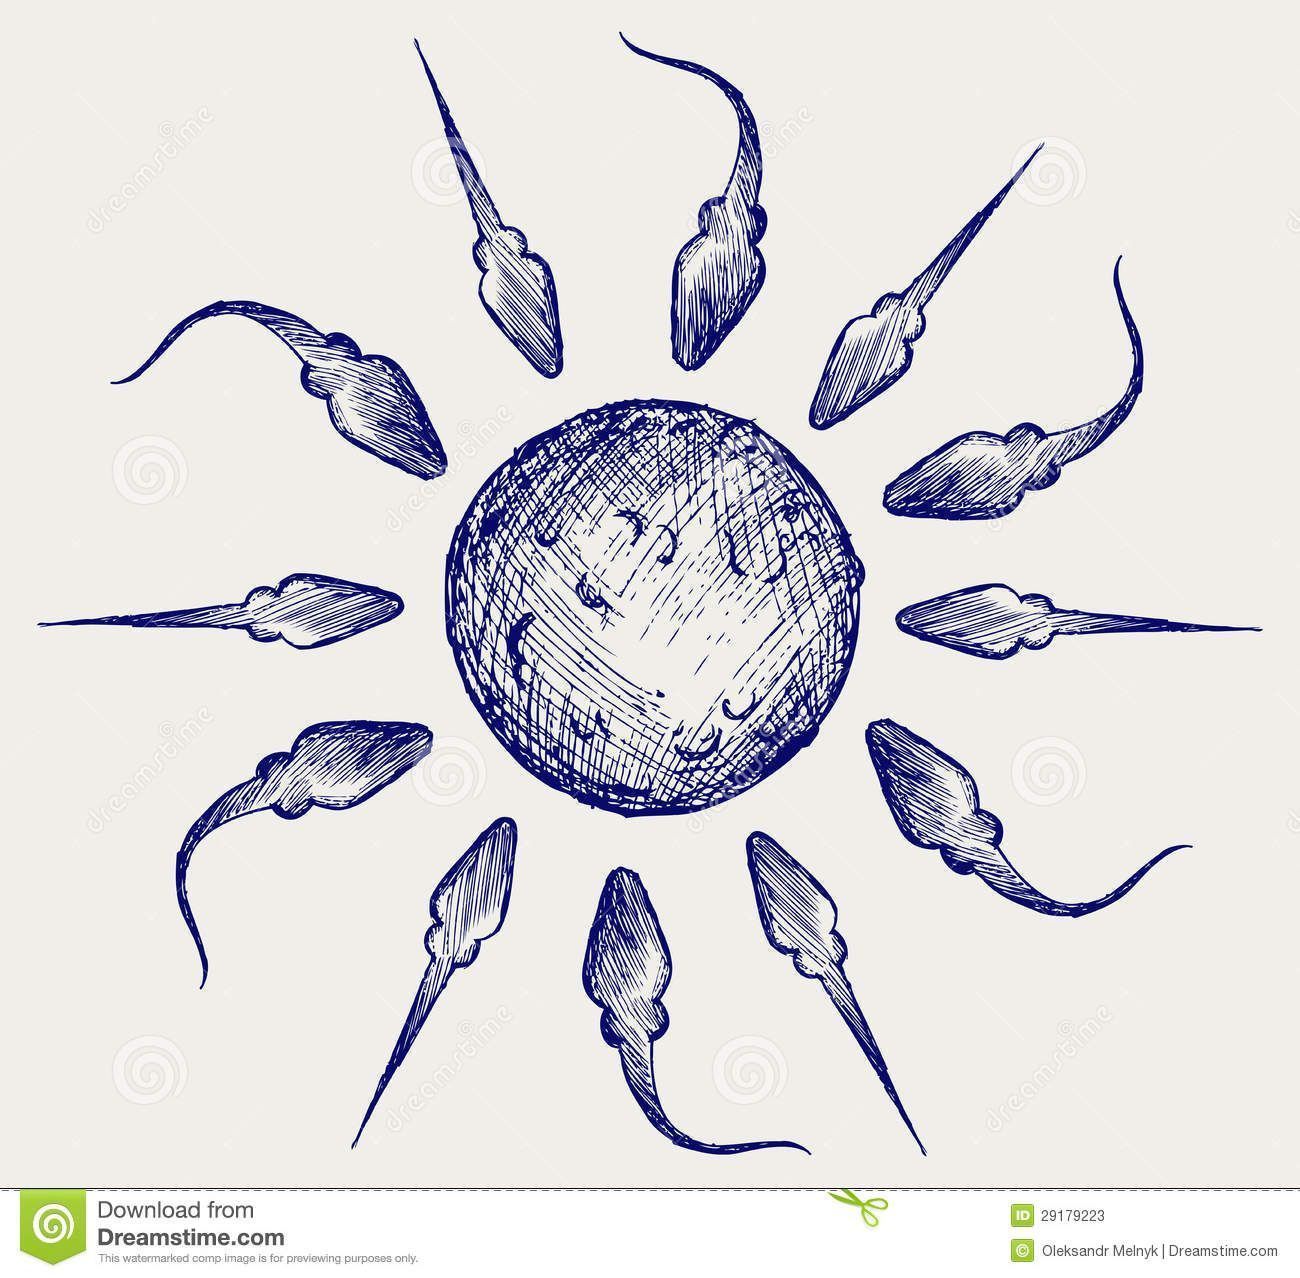 Illistrated pictures of sperm fertilizing egg